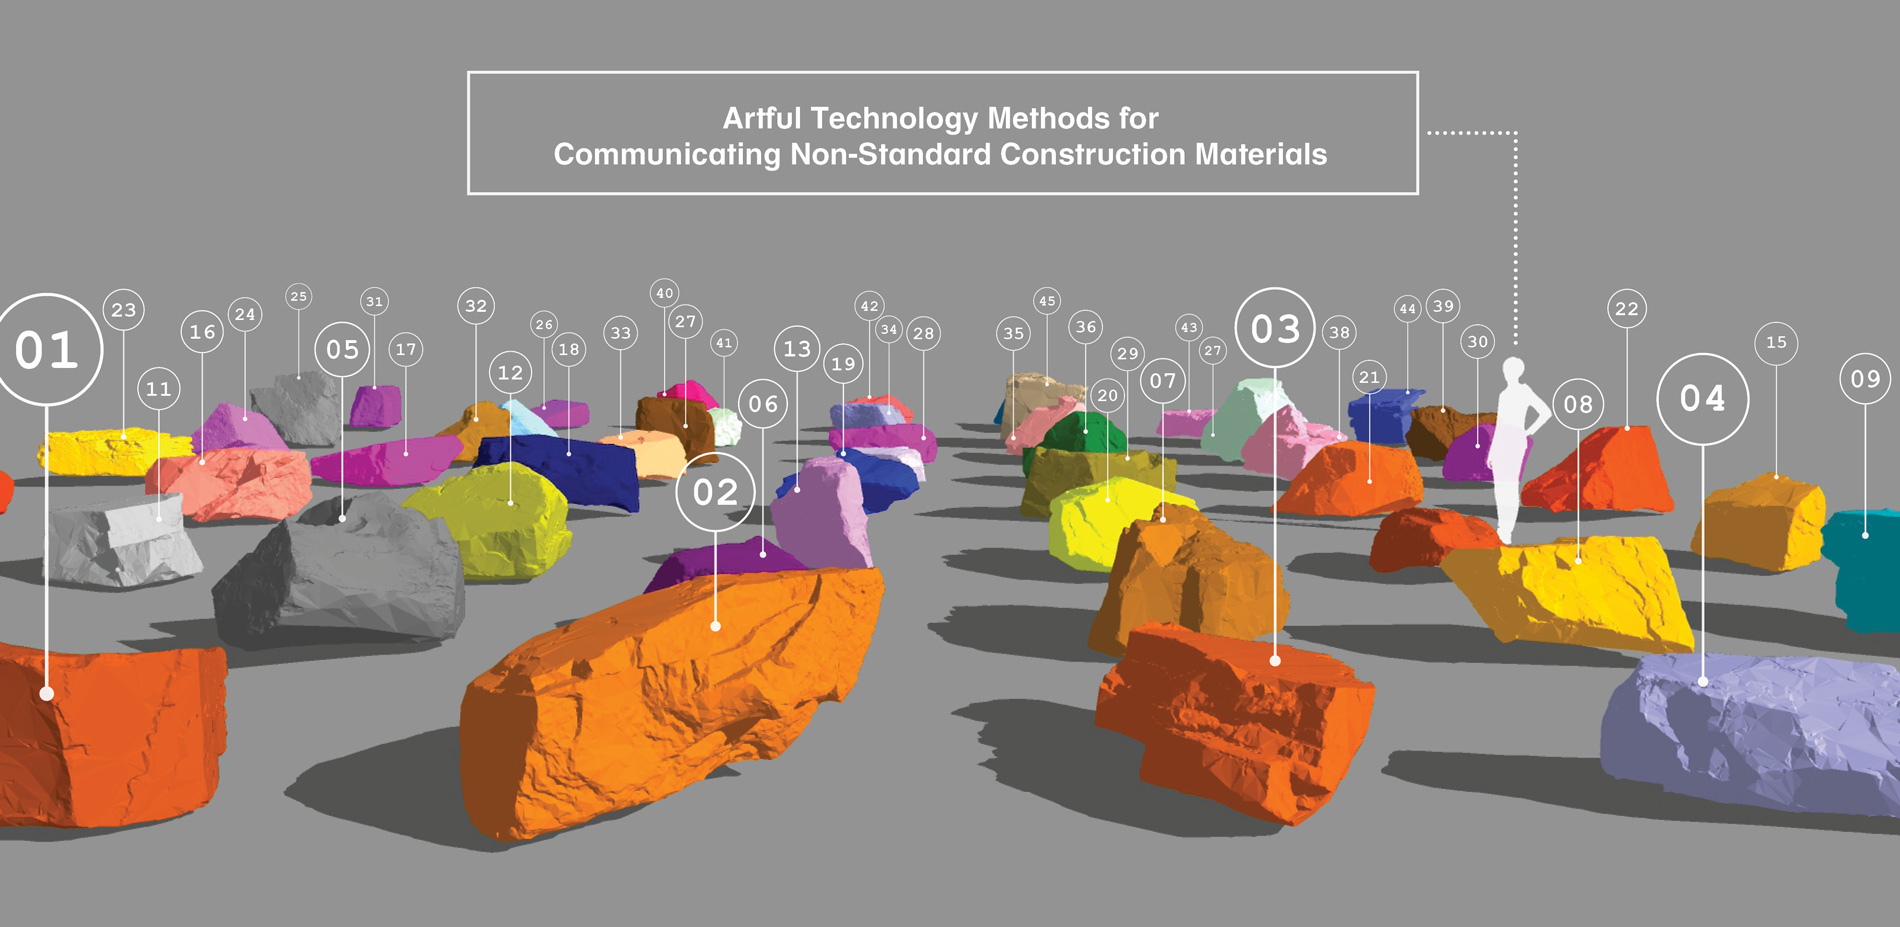 ARTFUL TECHNOLOGY METHODS FOR COMMUNICATING NON-STANDARD CONSTRUCTION MATERIALS